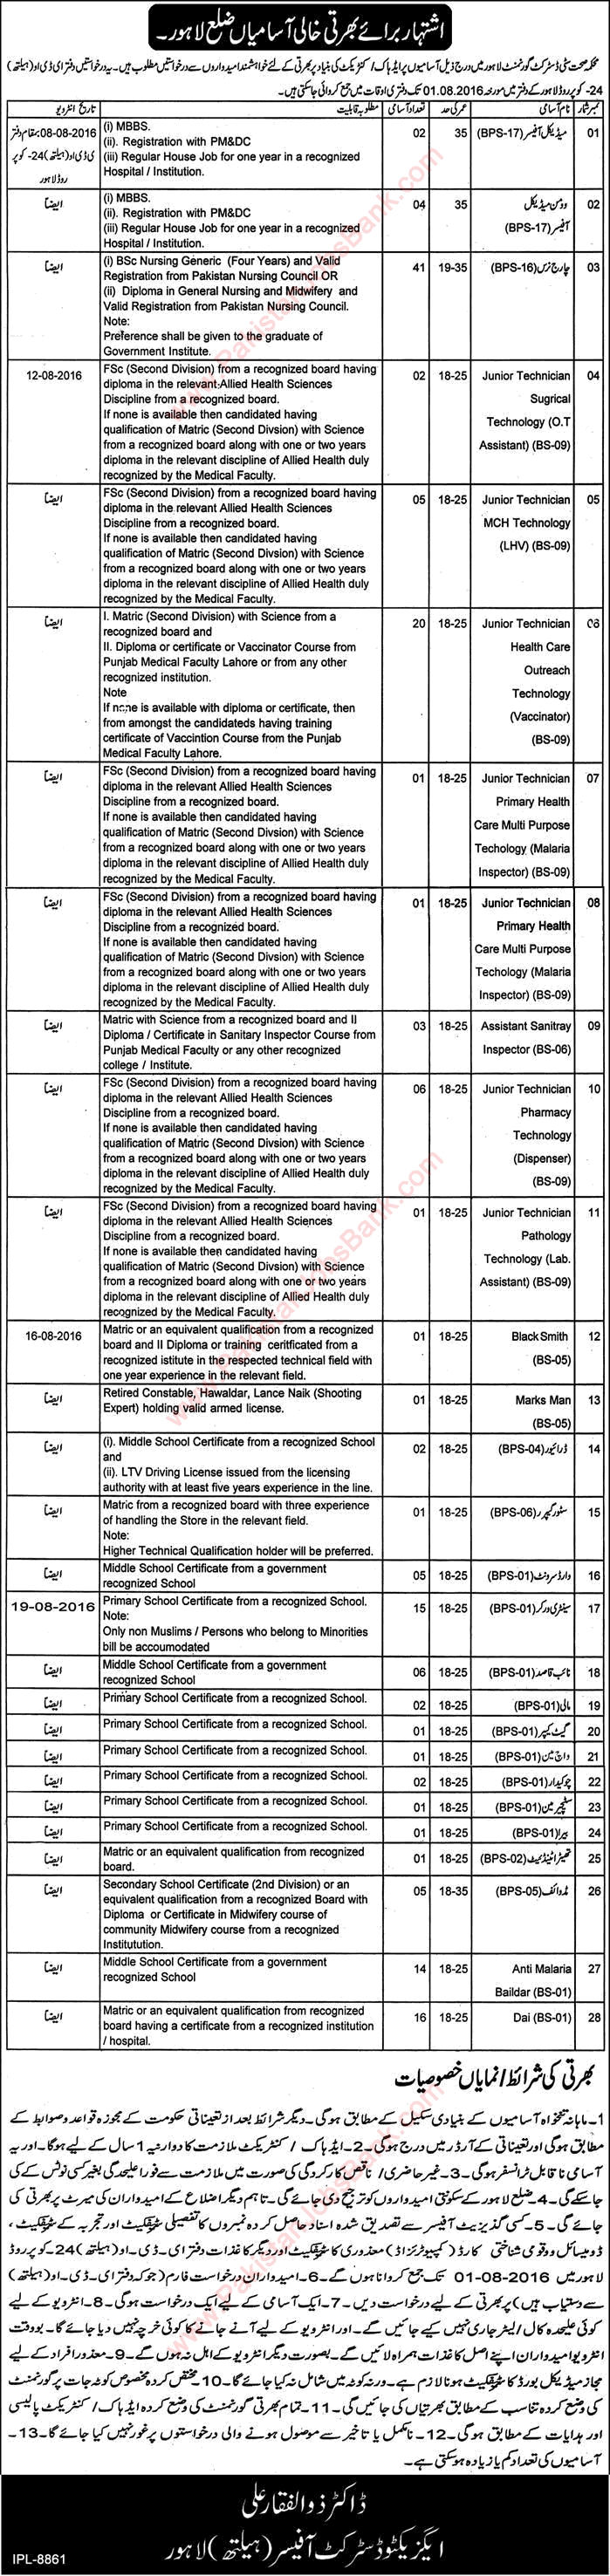 Health Department Lahore Jobs July 2016 Charge Nurses, Medical Technicians, Sanitary Workers & Others Latest